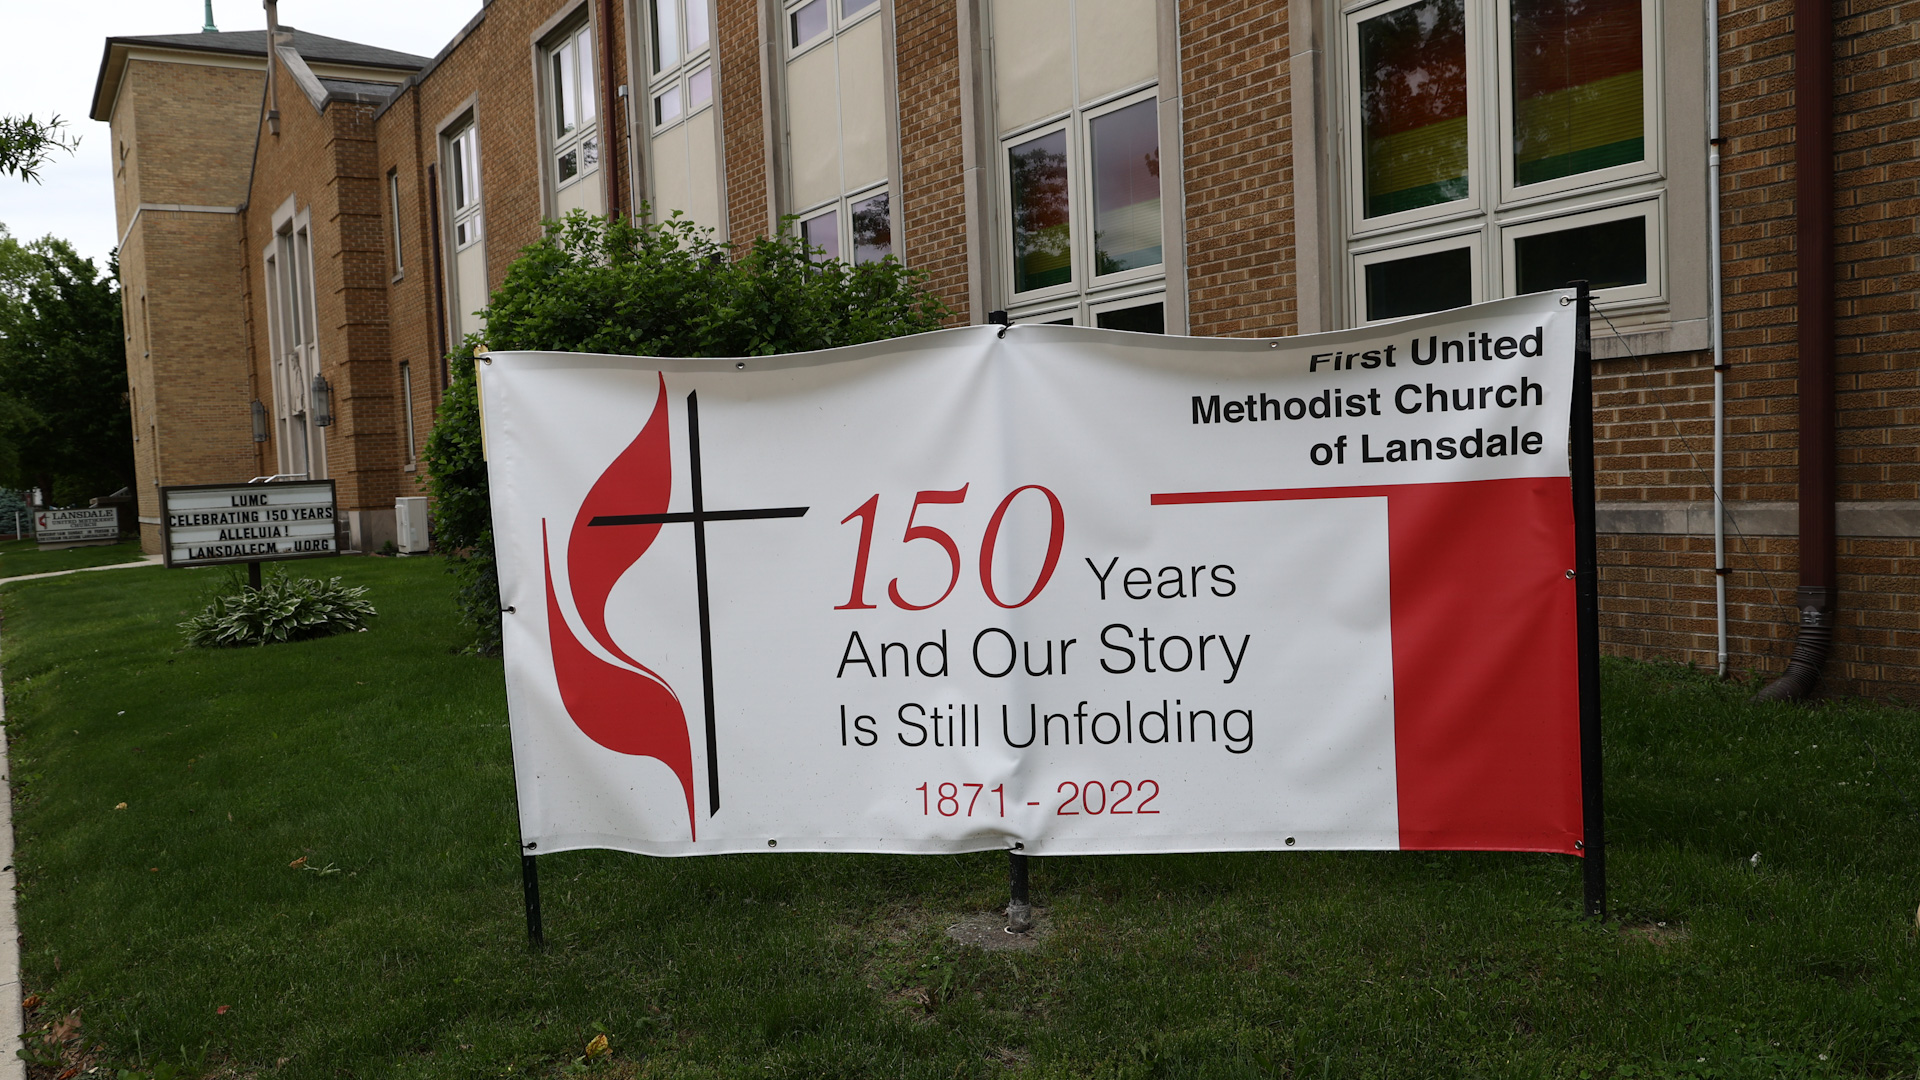 Featured image for “The Unfolding Story of a Methodist Church in Lansdale”